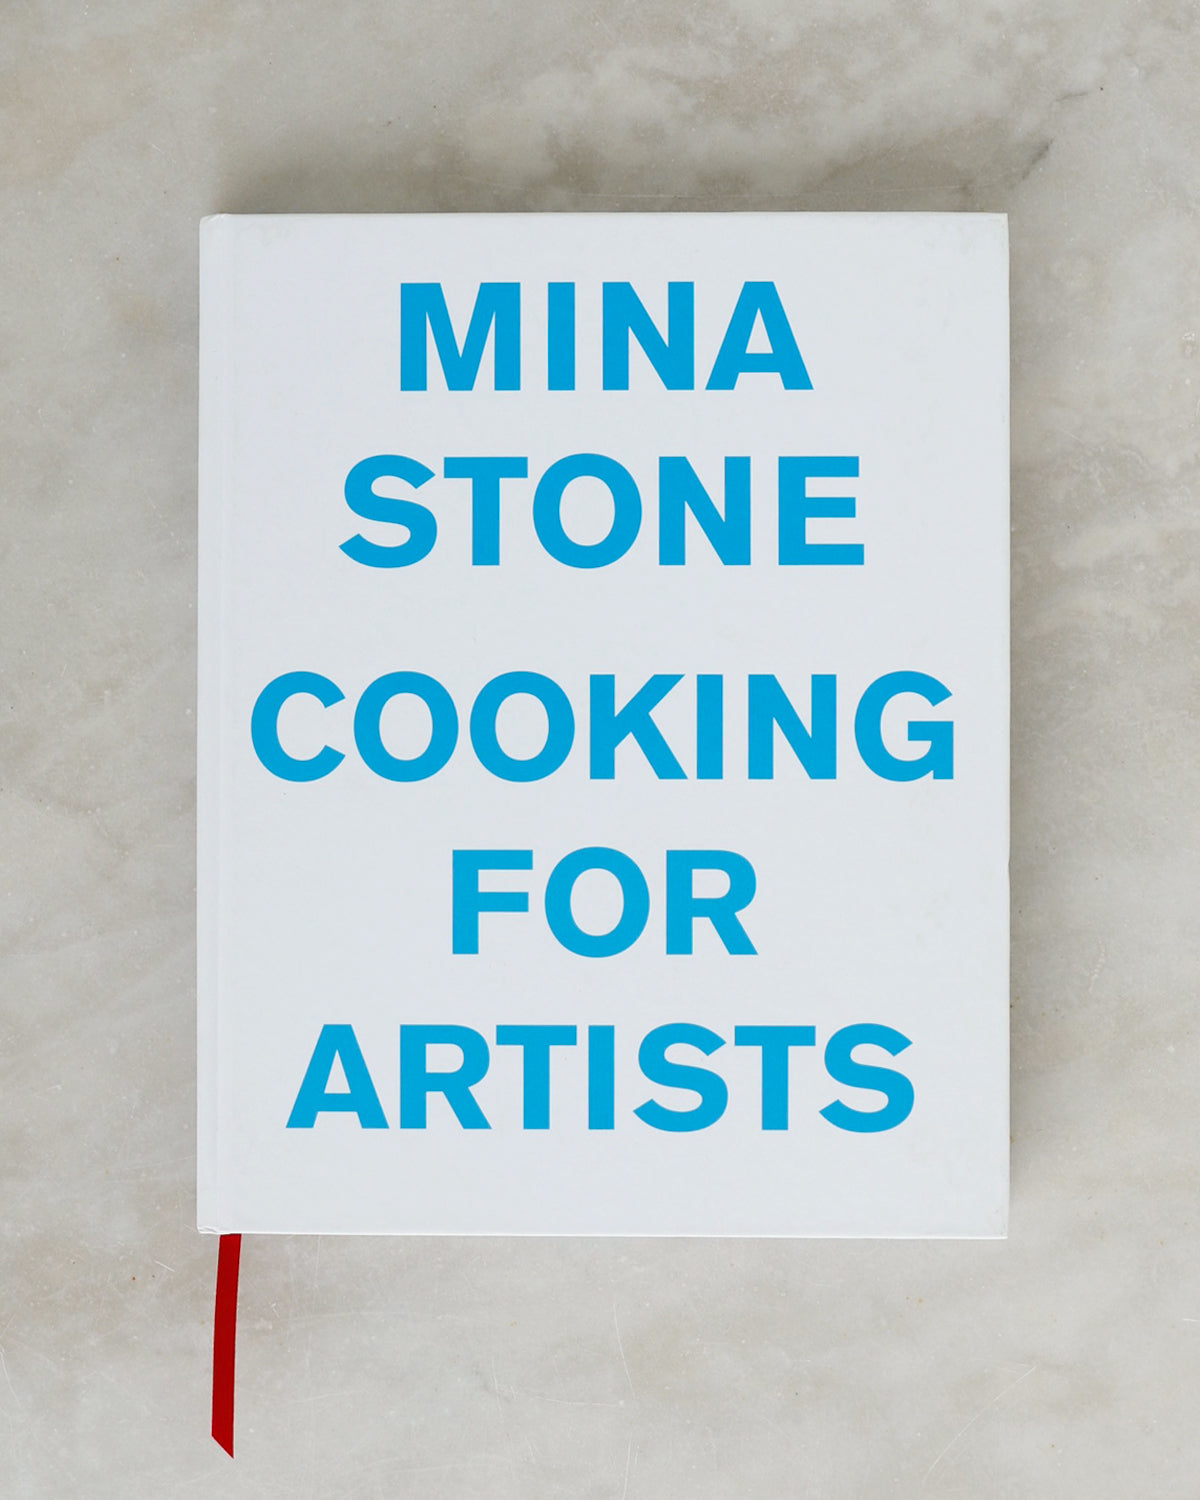 Mina Stone: Cooking For Artists